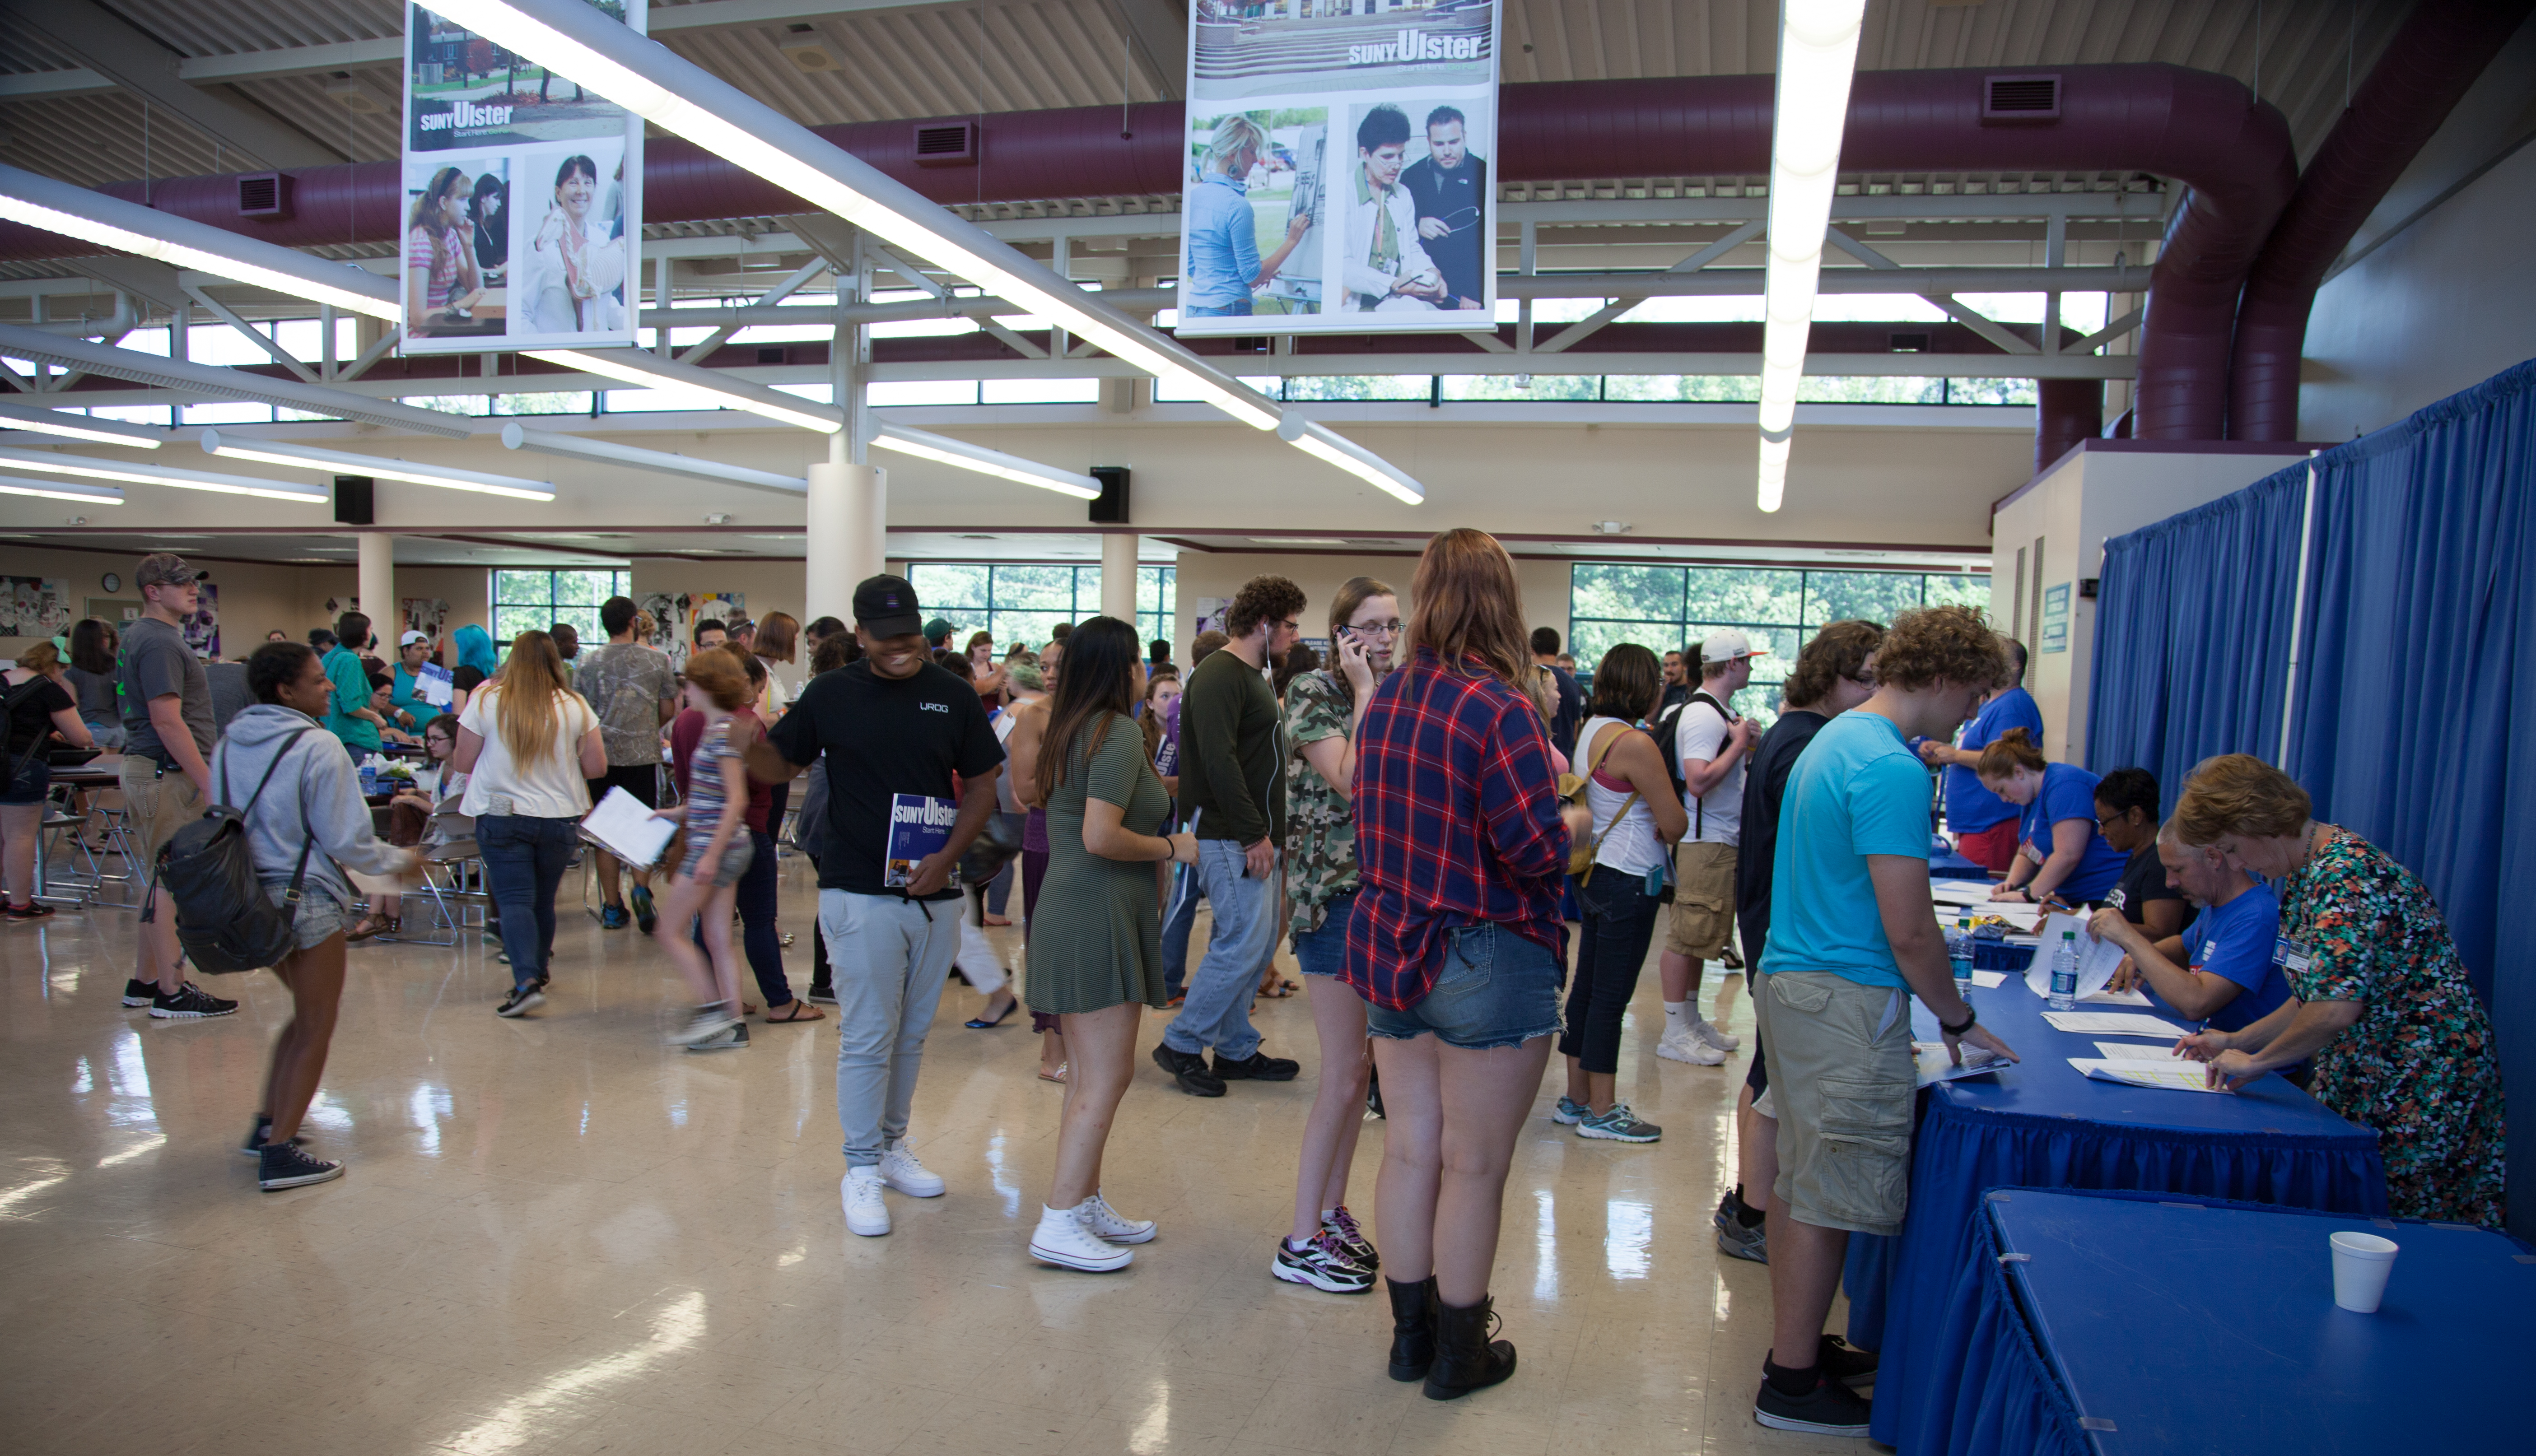 busy dining hall with students waiting in lines